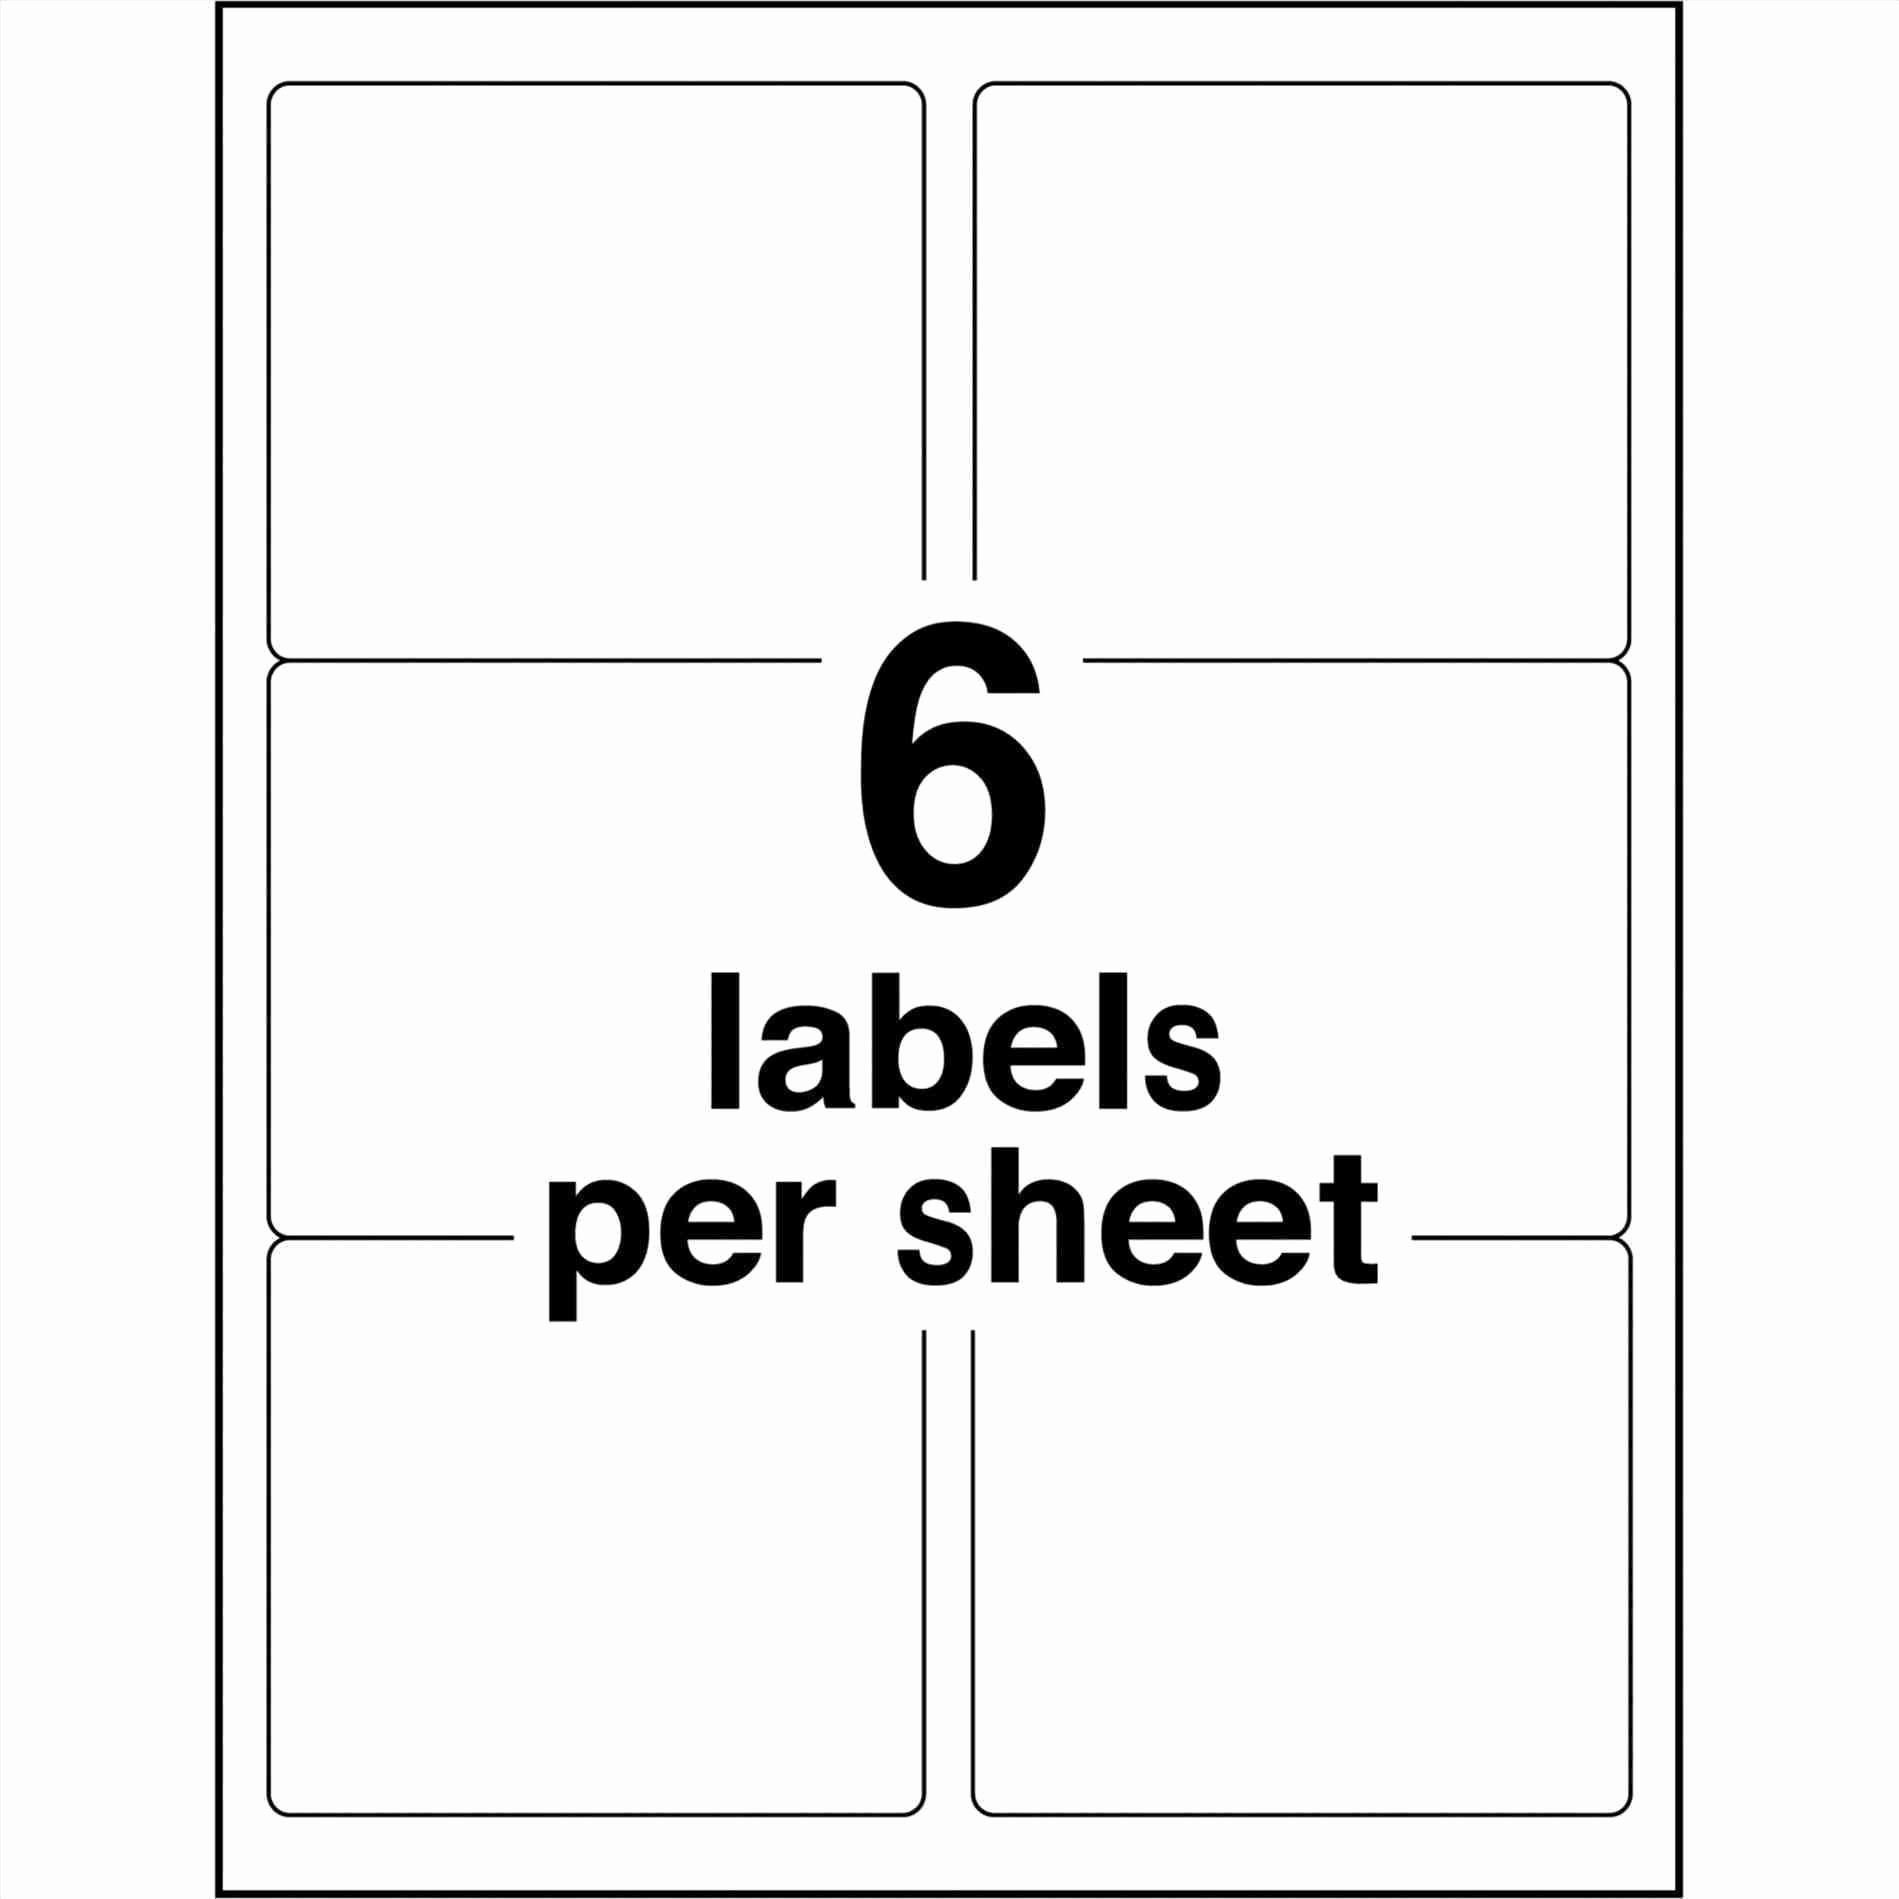 2 25 X 1 25 Label Template Get What You Need For Free